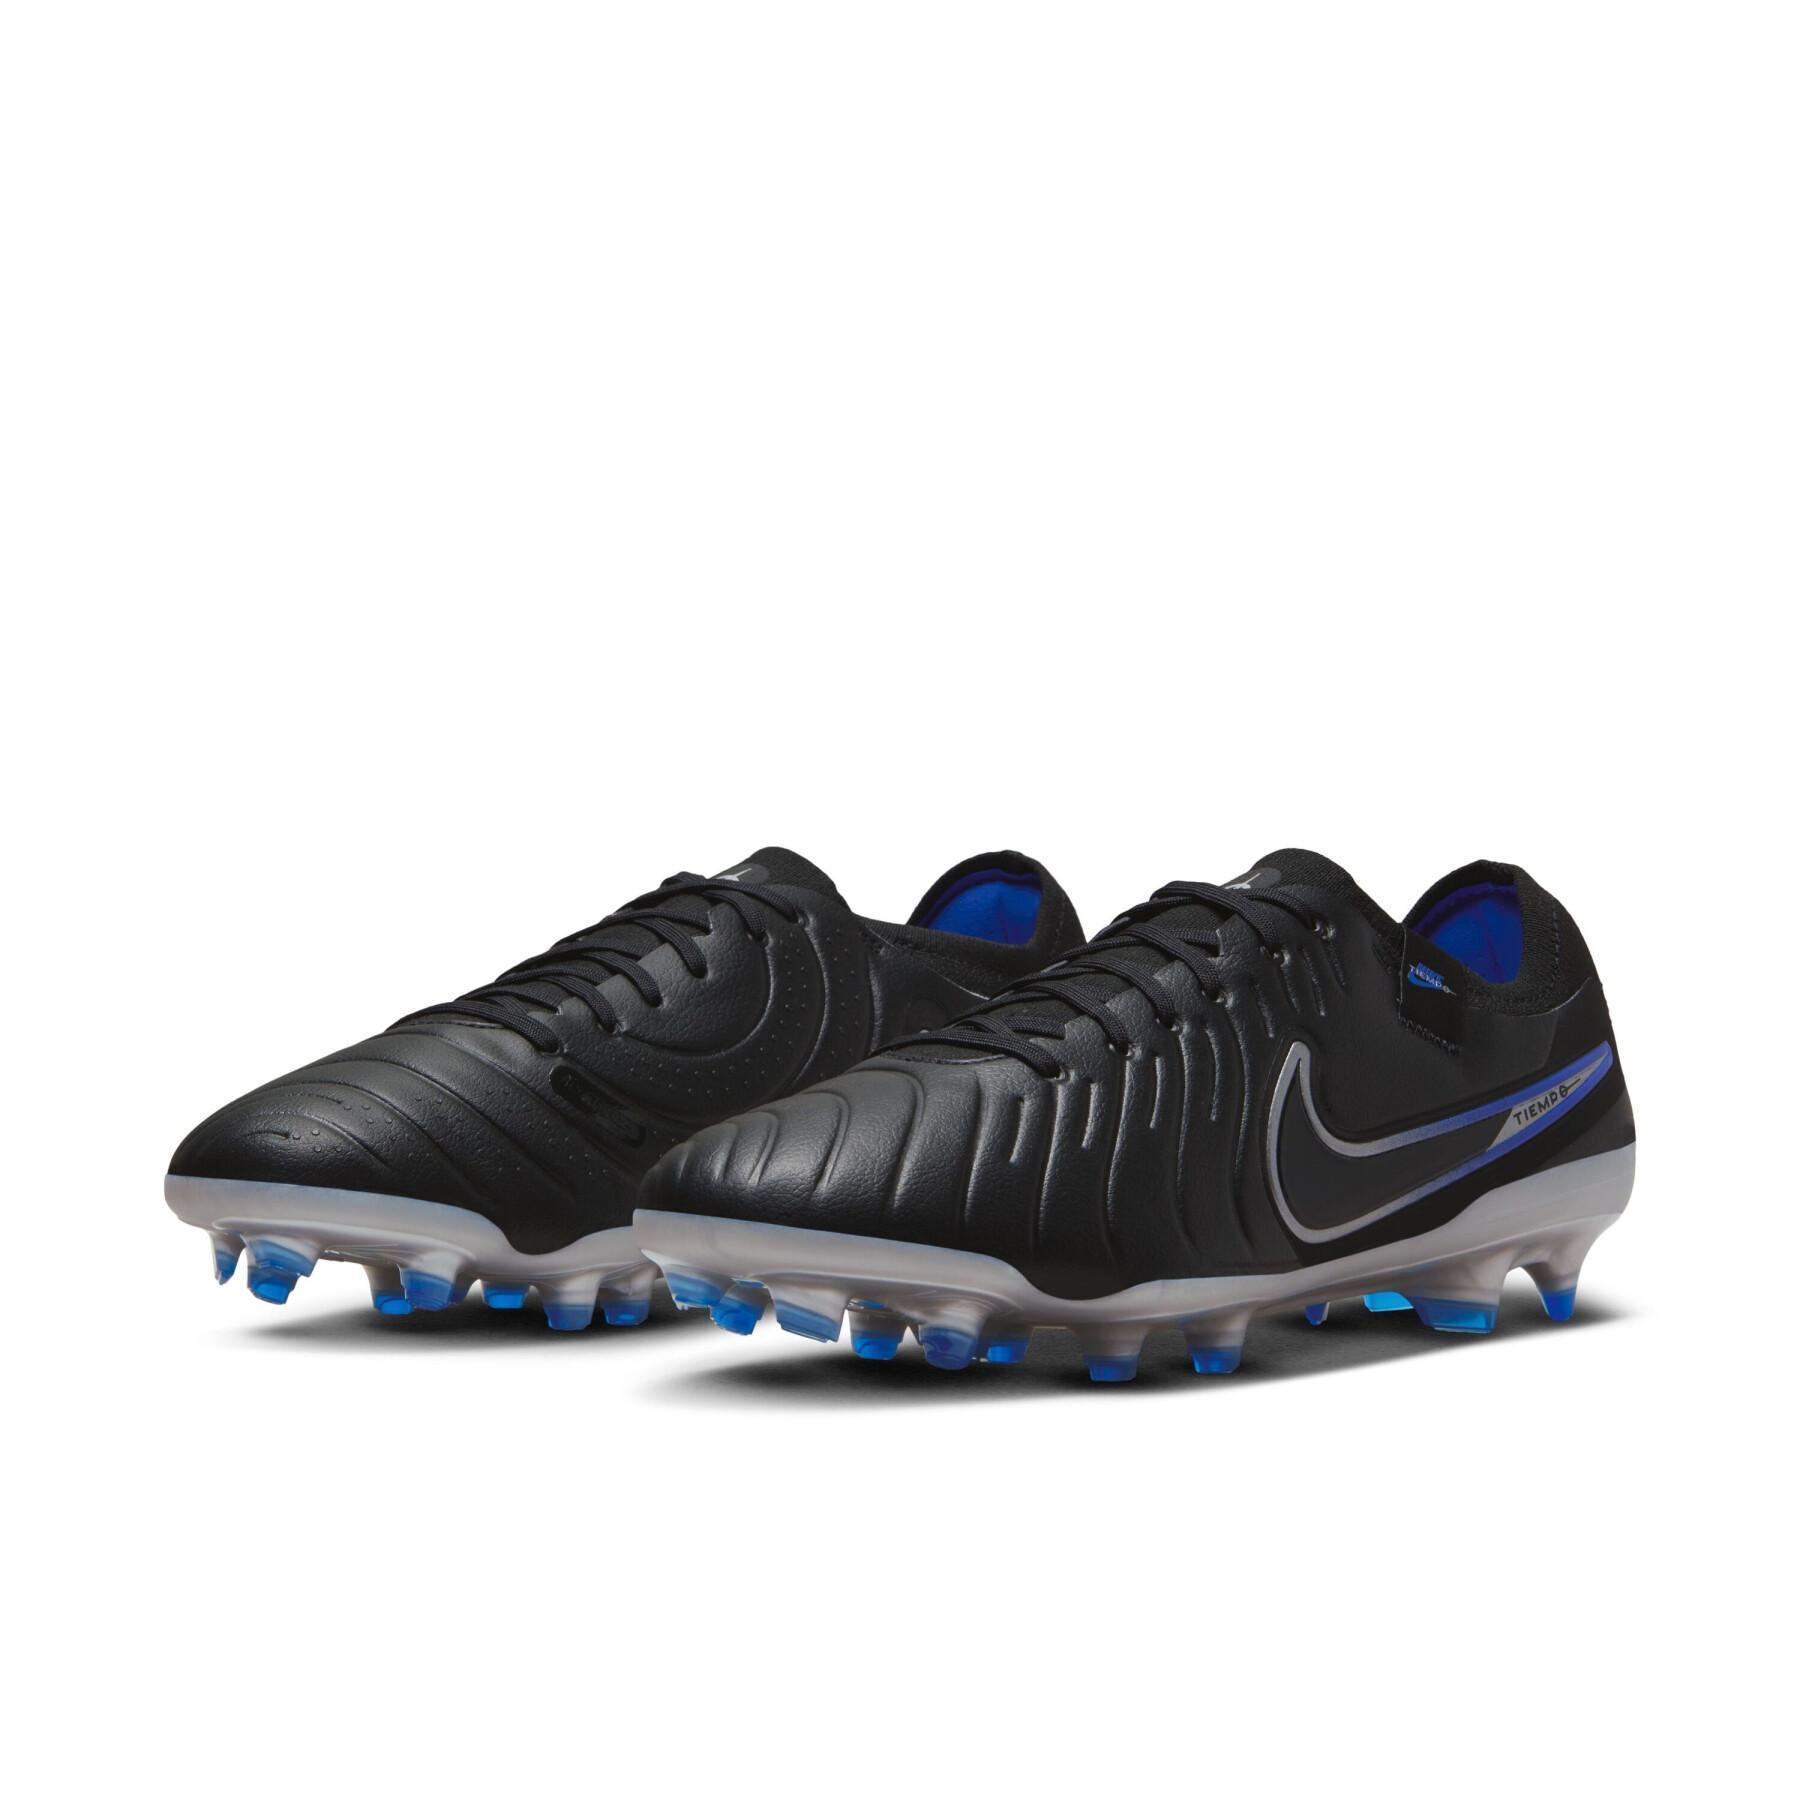 Soccer cleats Nike Tiempo Legend 10 Pro FG - Shadow Pack